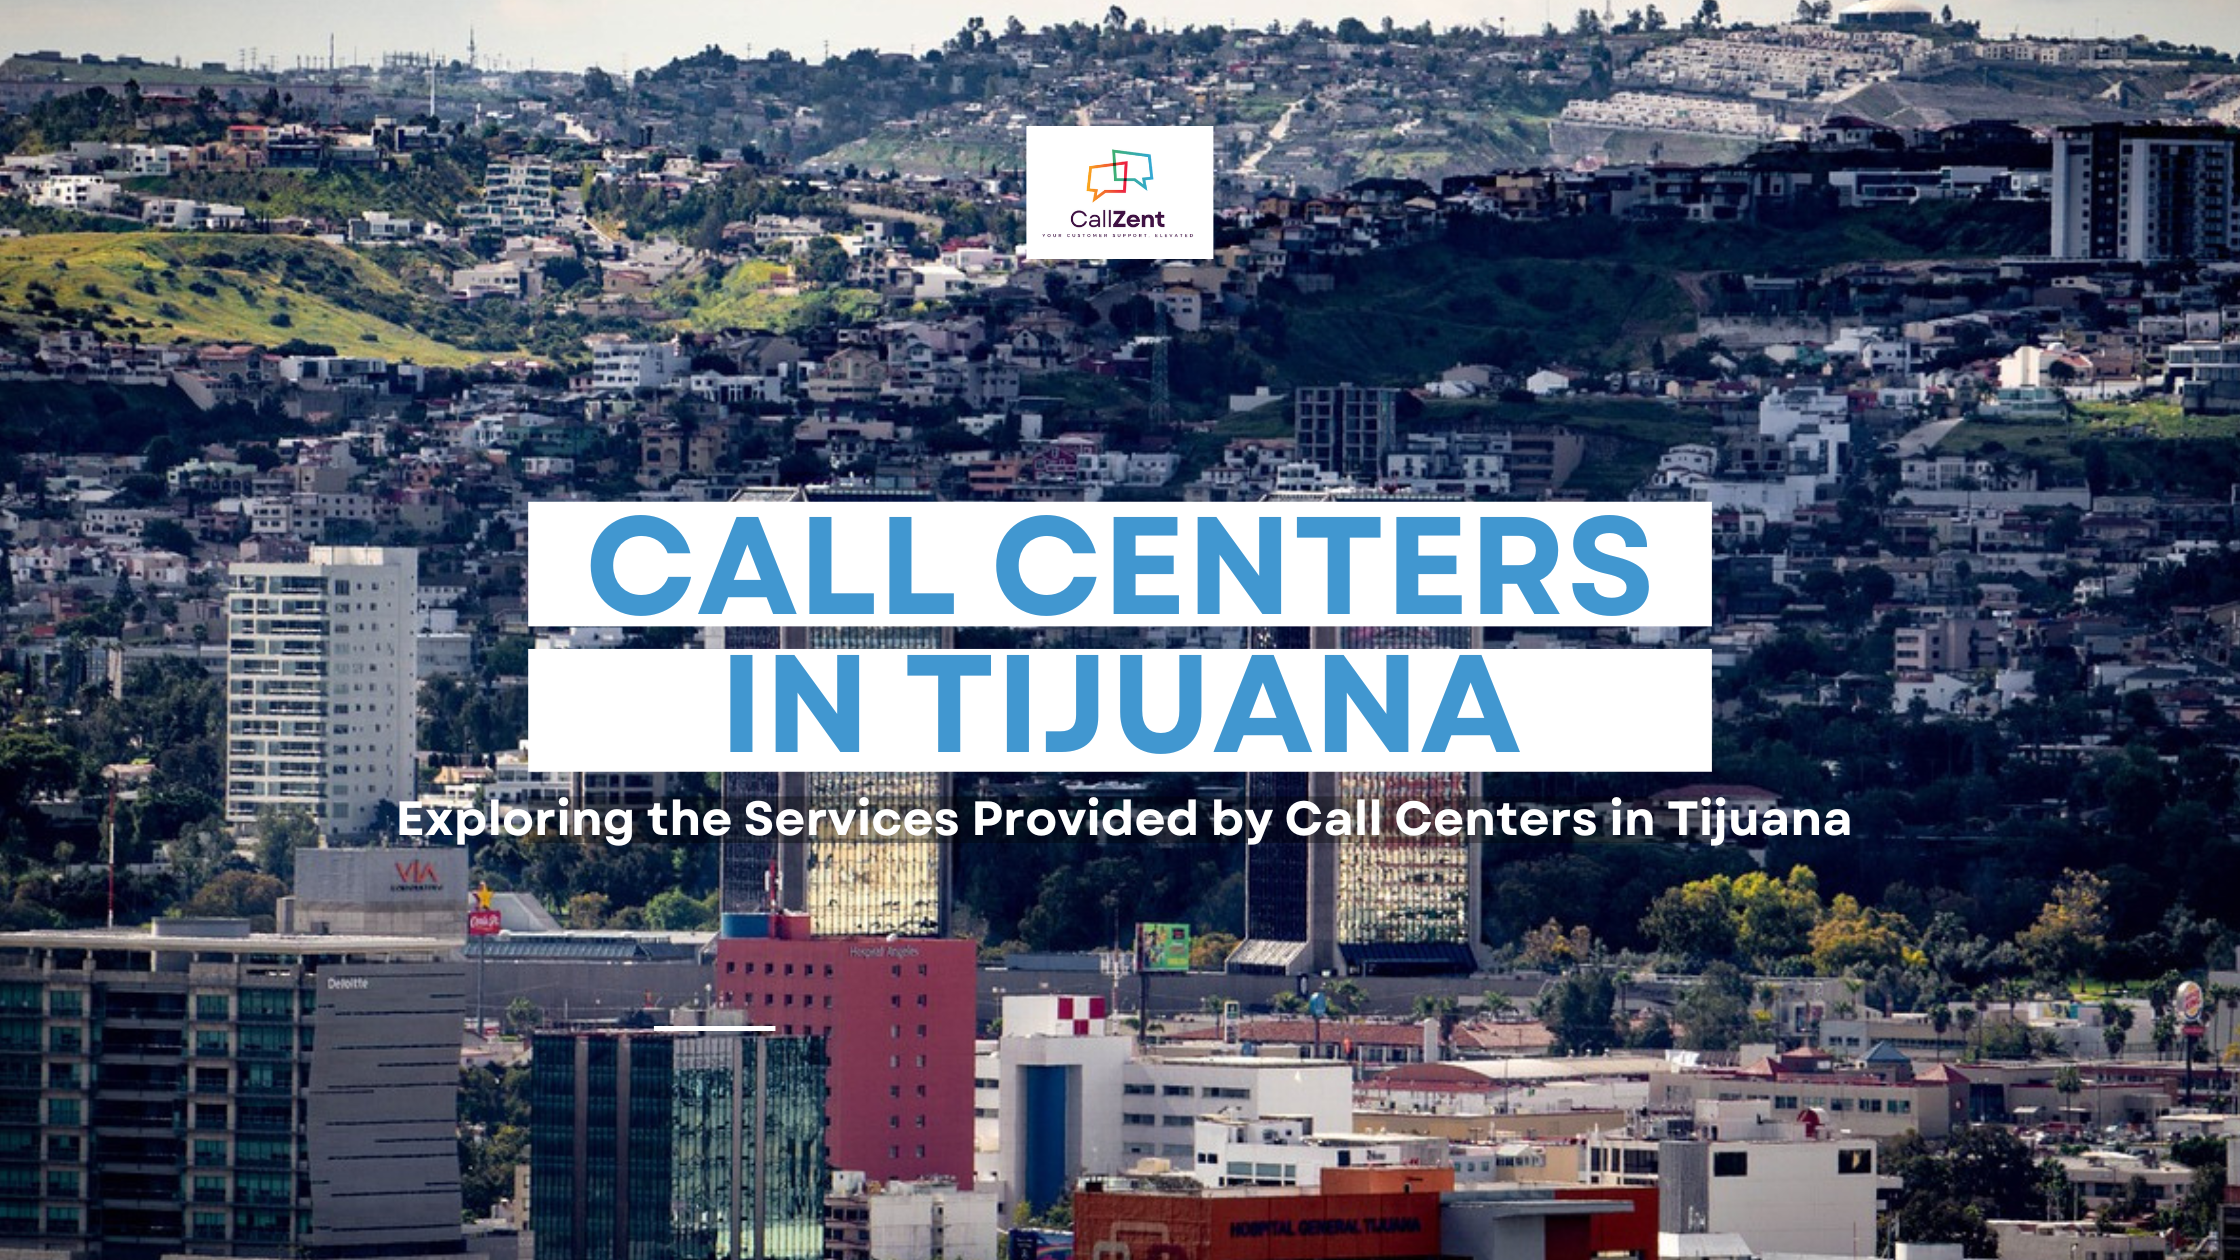 Services Provided by Call Centers in Tijuana